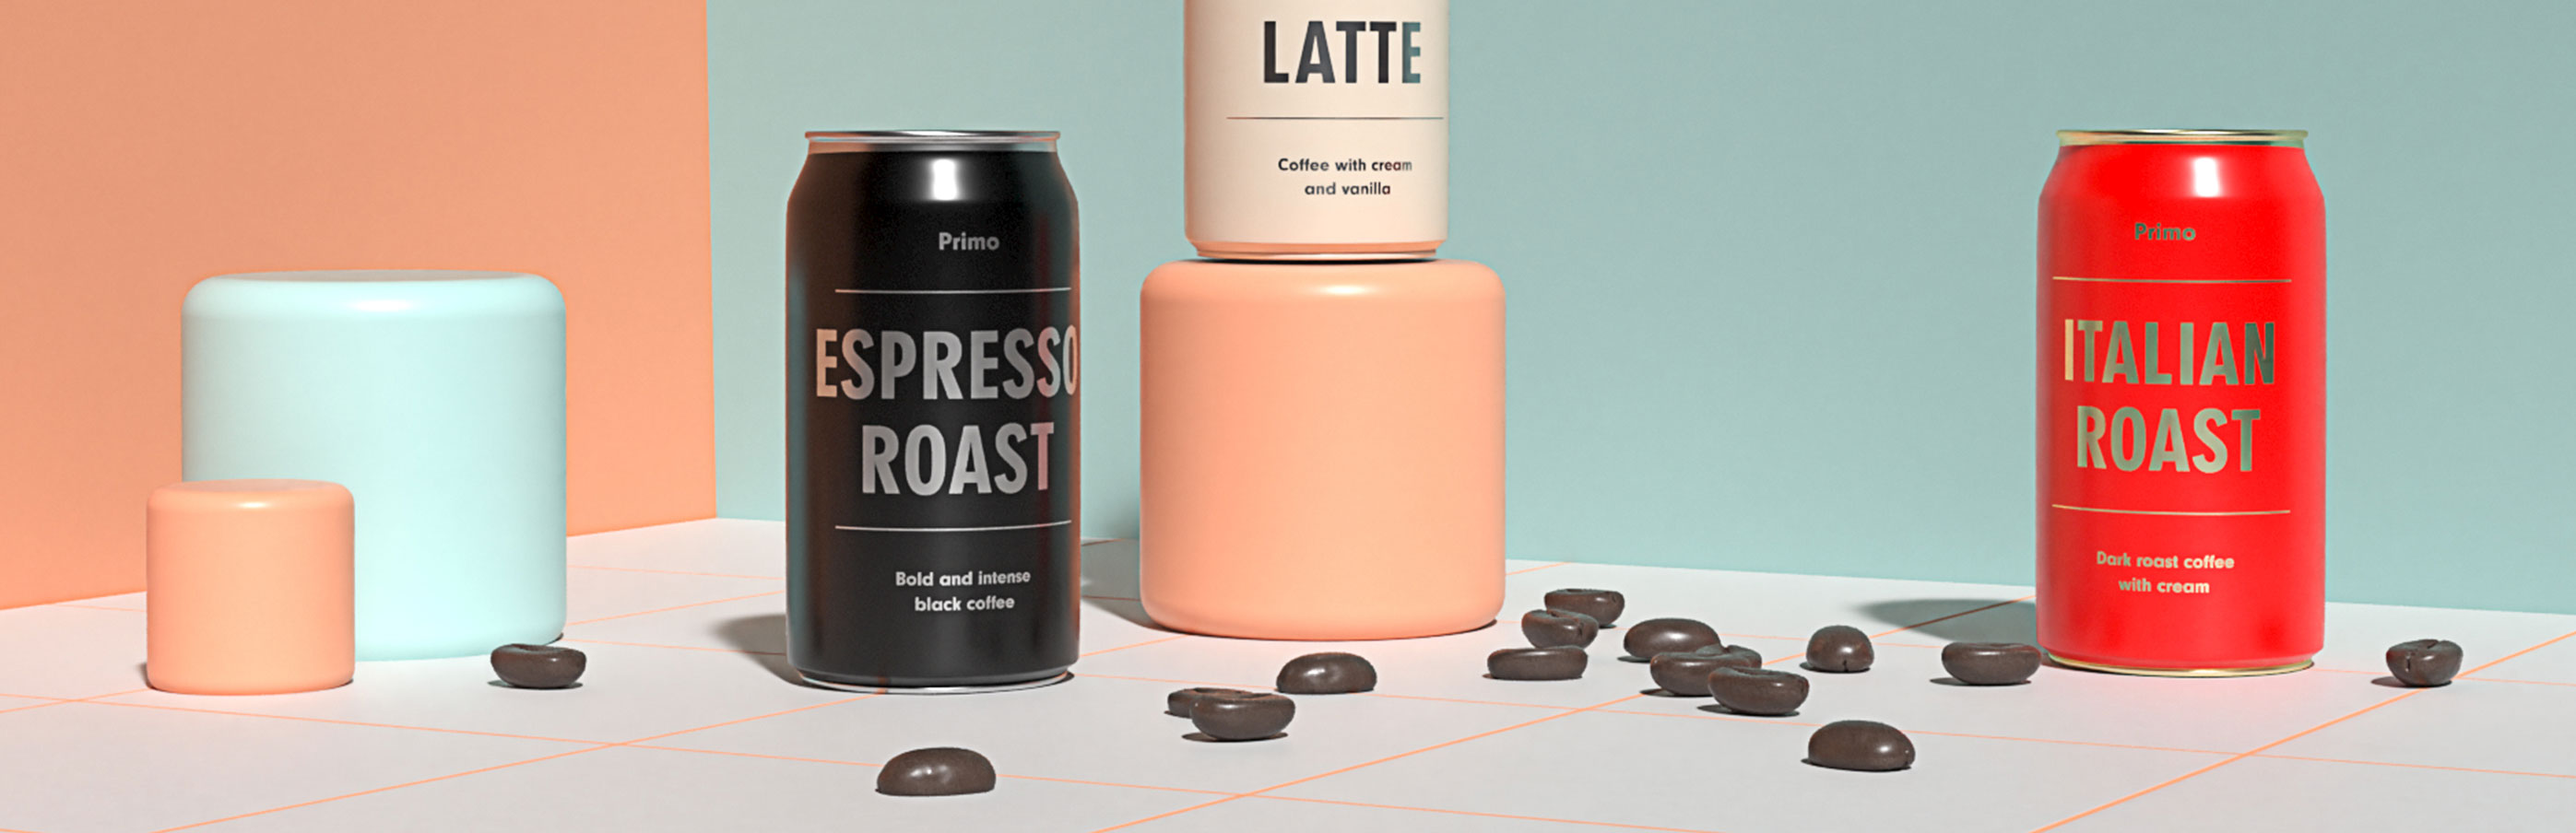 Creating Packaging And Prototypes With Adobe Dimension Desk Magazine